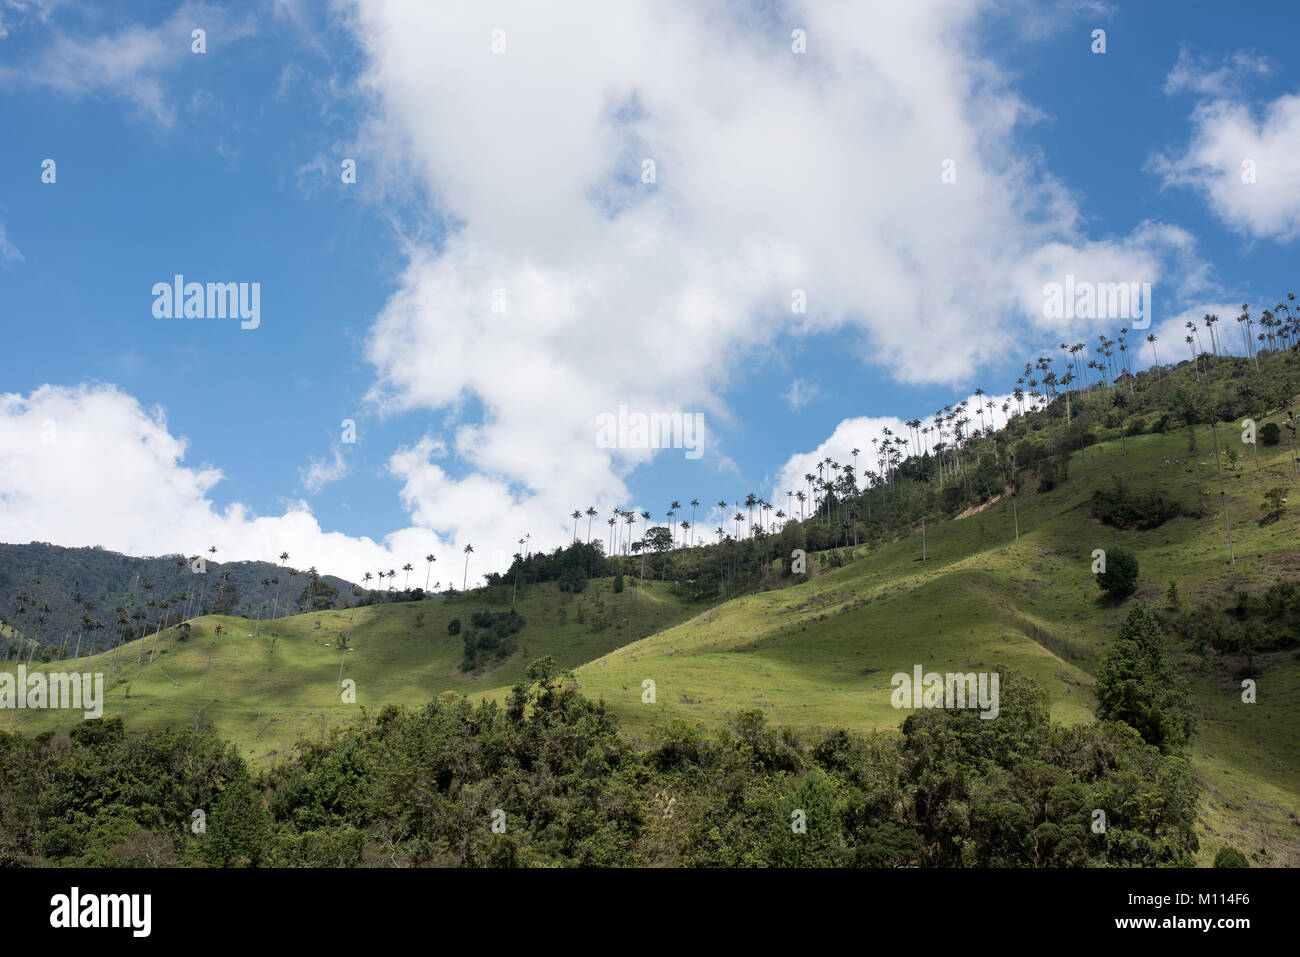 Cocora valley near Salento with enchanting landscape of pines and eucalyptus towered over by the famous giant wax palms, clear blue sky, Colombia Stock Photo